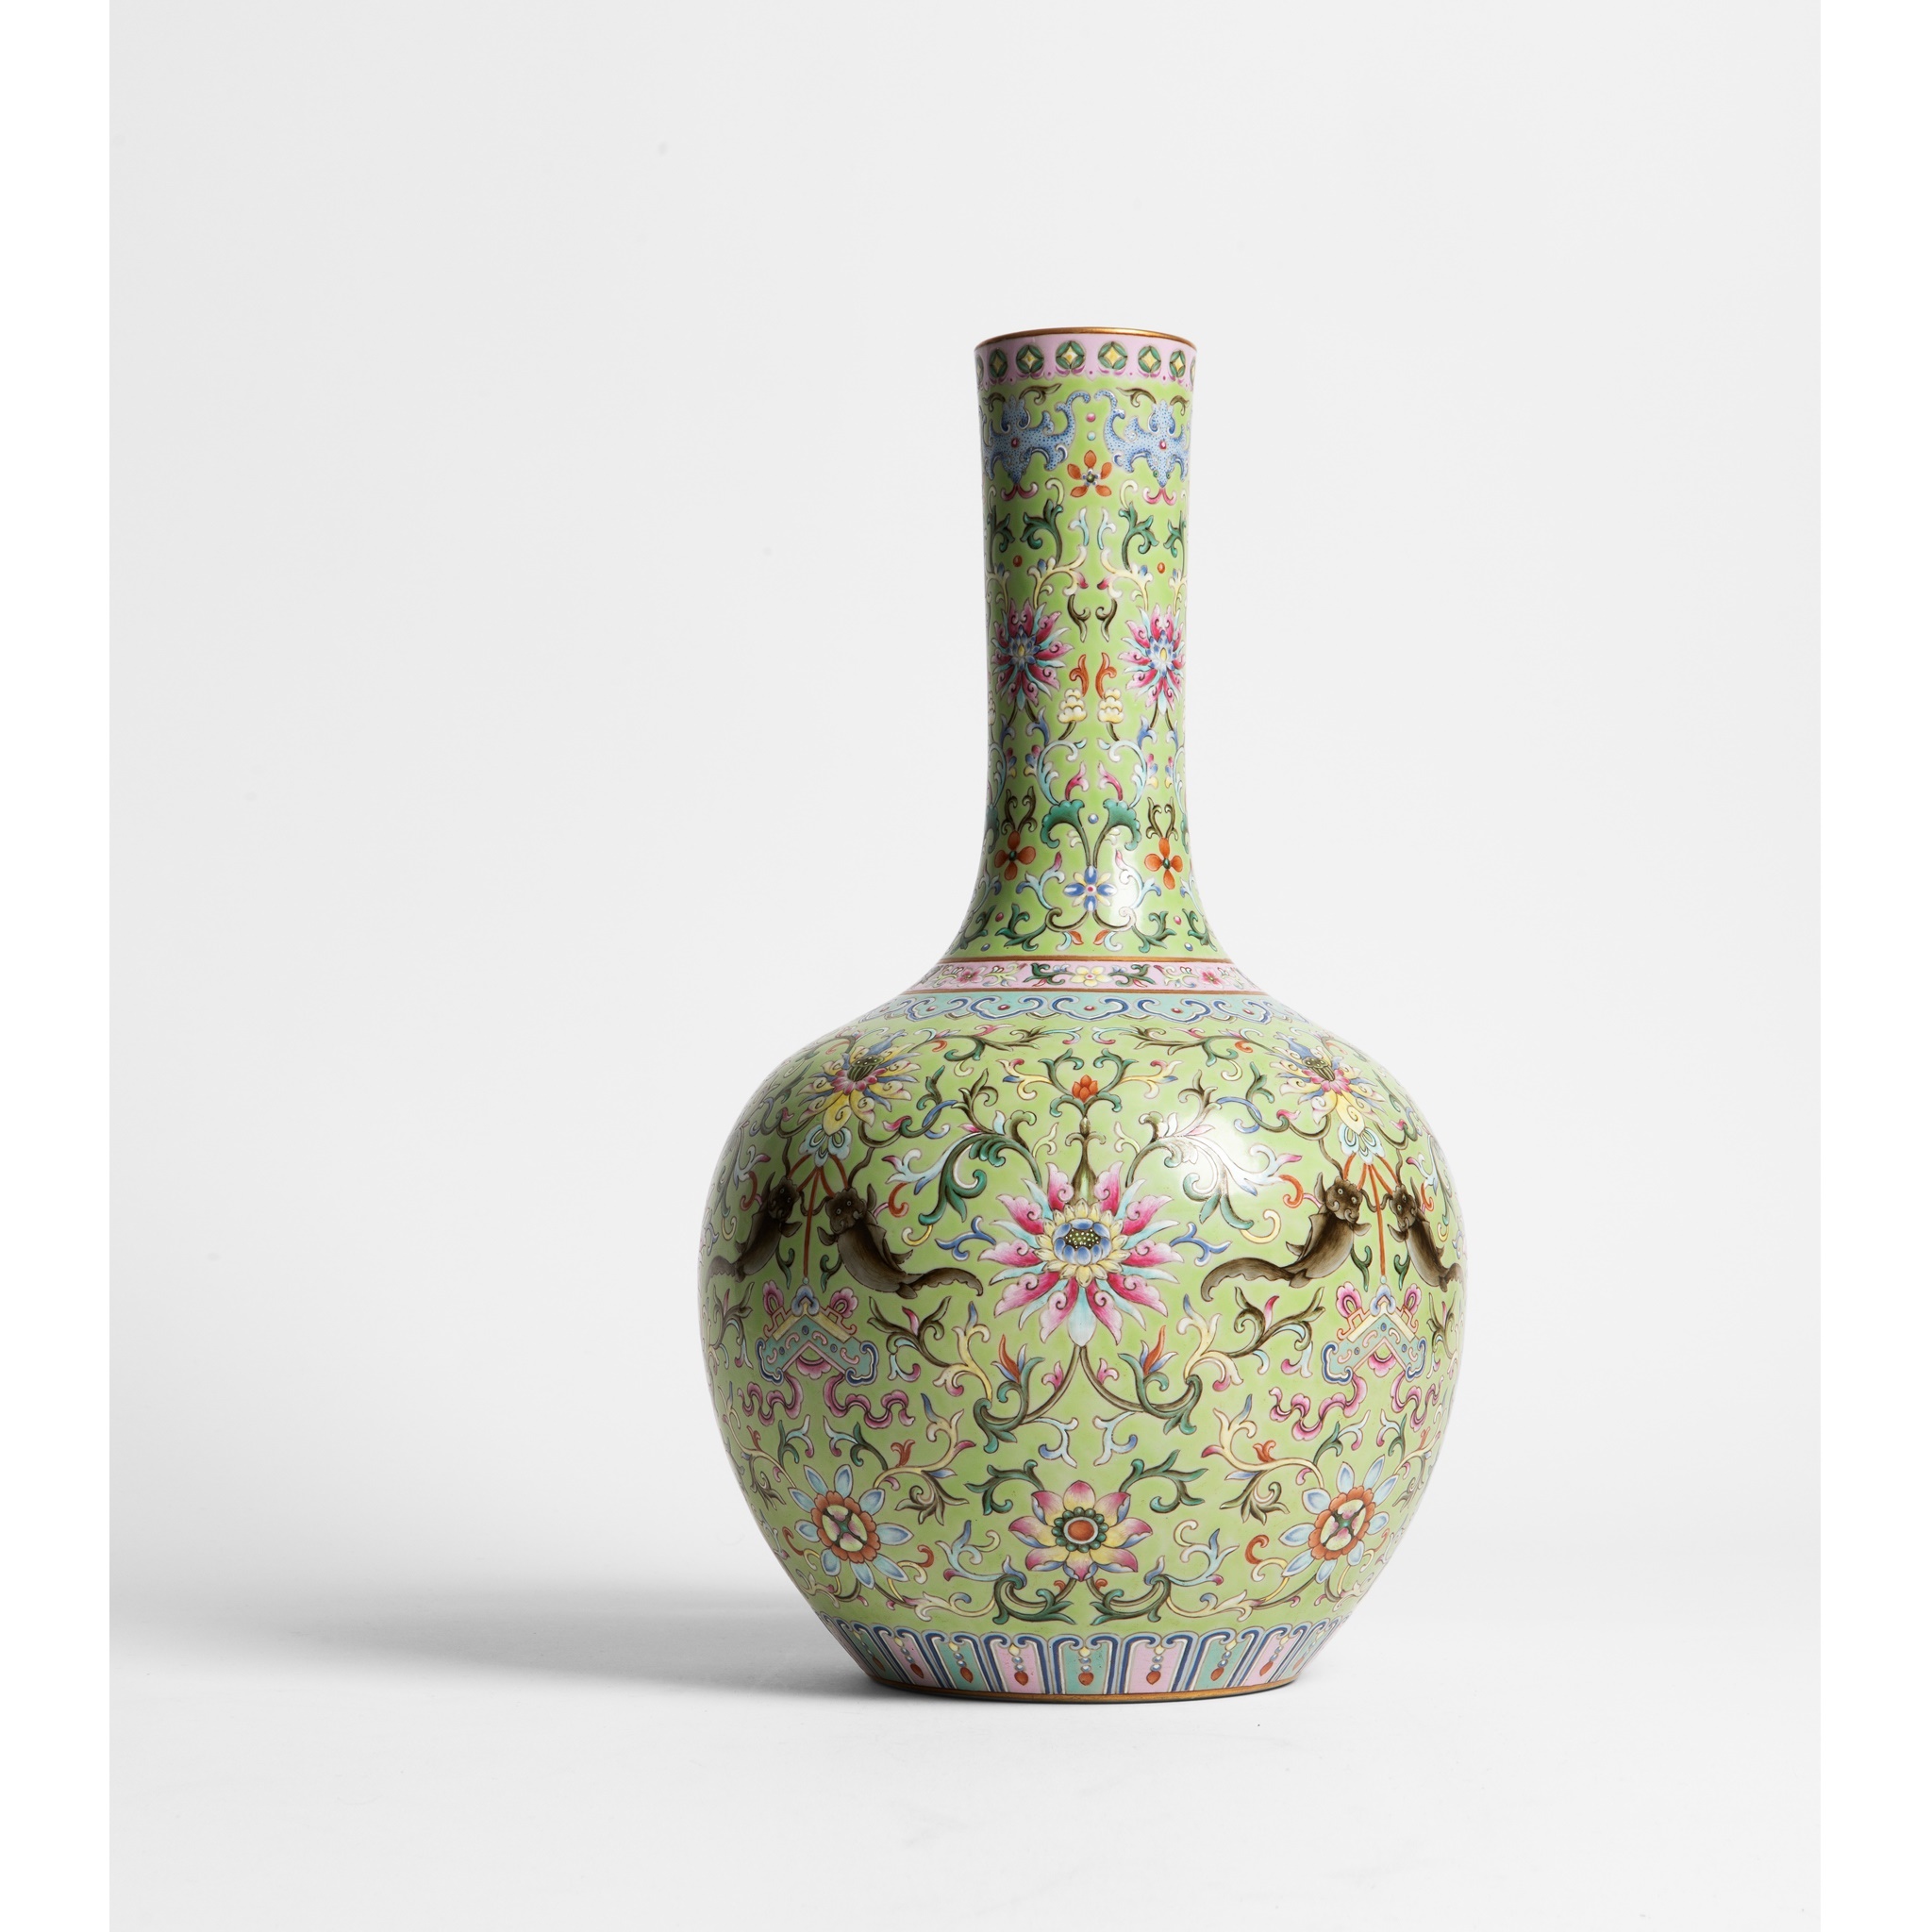 GREEN GROUND FAMILLE ROSE BOTTLE VASE JIAQING MARK AND POSSIBLY OF THE PERIOD